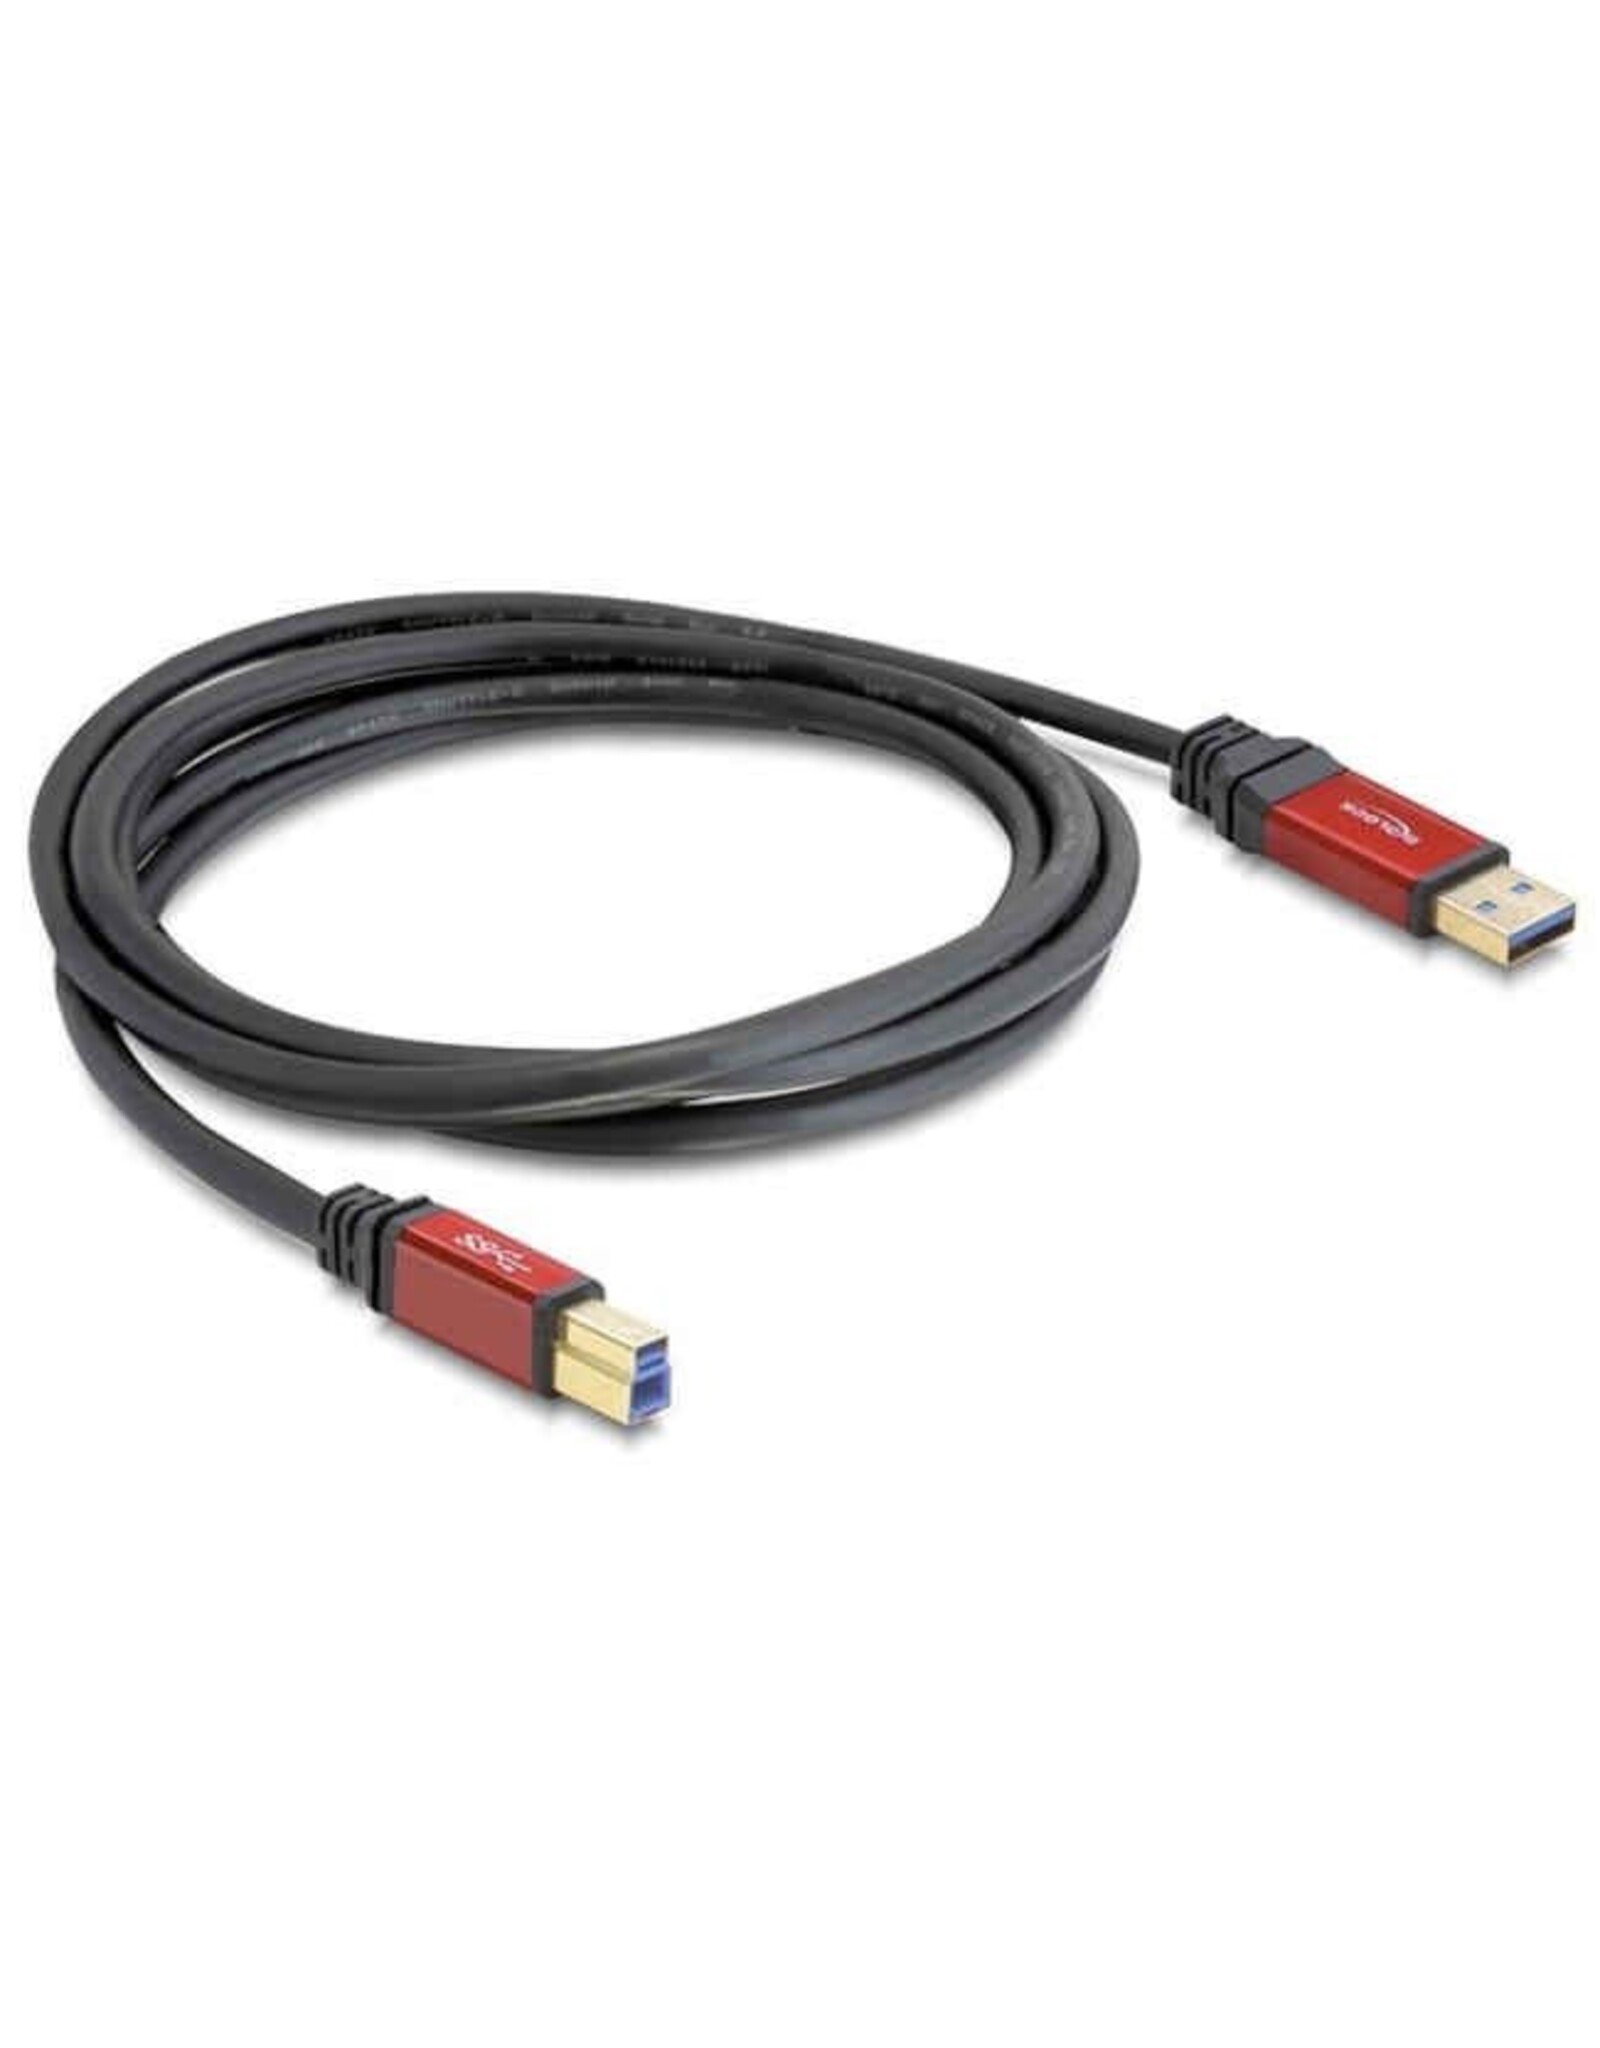 Pegasus Astro Pegasus Astro USB 3.0 Cable Type-A Male to Type-B Male, Single Cord (6.6 ft/2 m)